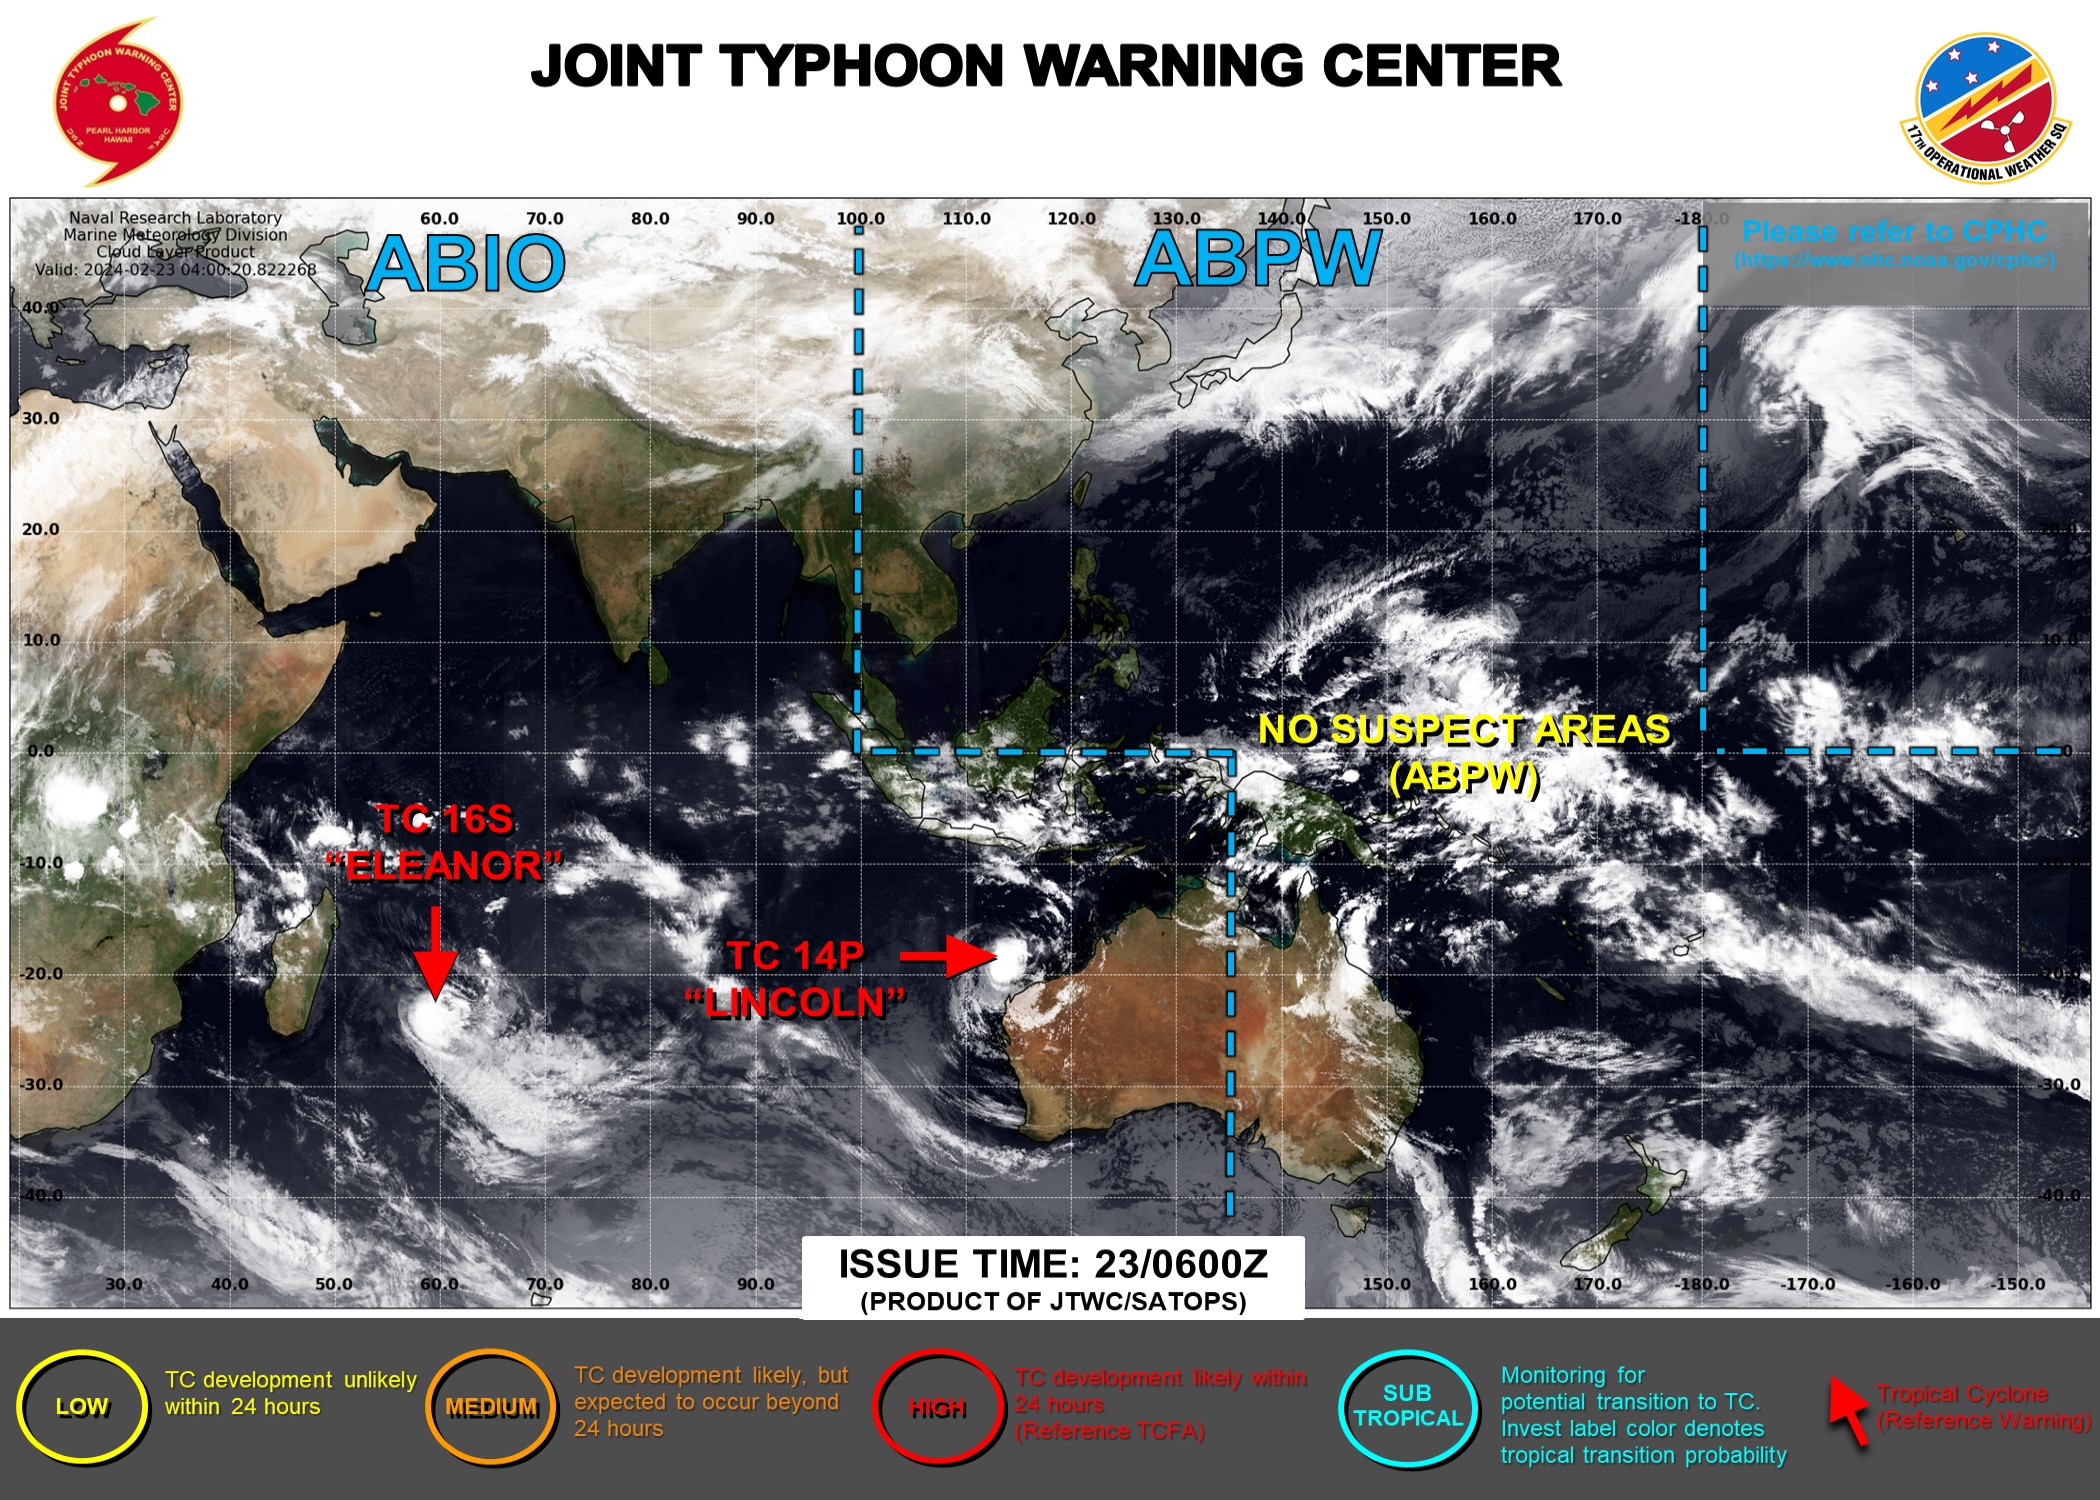 JTWC IS ISSUING 6HOURLY WARNINGS AND 3HOURLY SATELLITE BULLETINS ON TC 14P(LINCOLN). JTWC IS ISSUING 12HOURLY WARNINGS AND 3HOURLY SATELLITE BULLETINS ON TC 16S(ELEANOR).